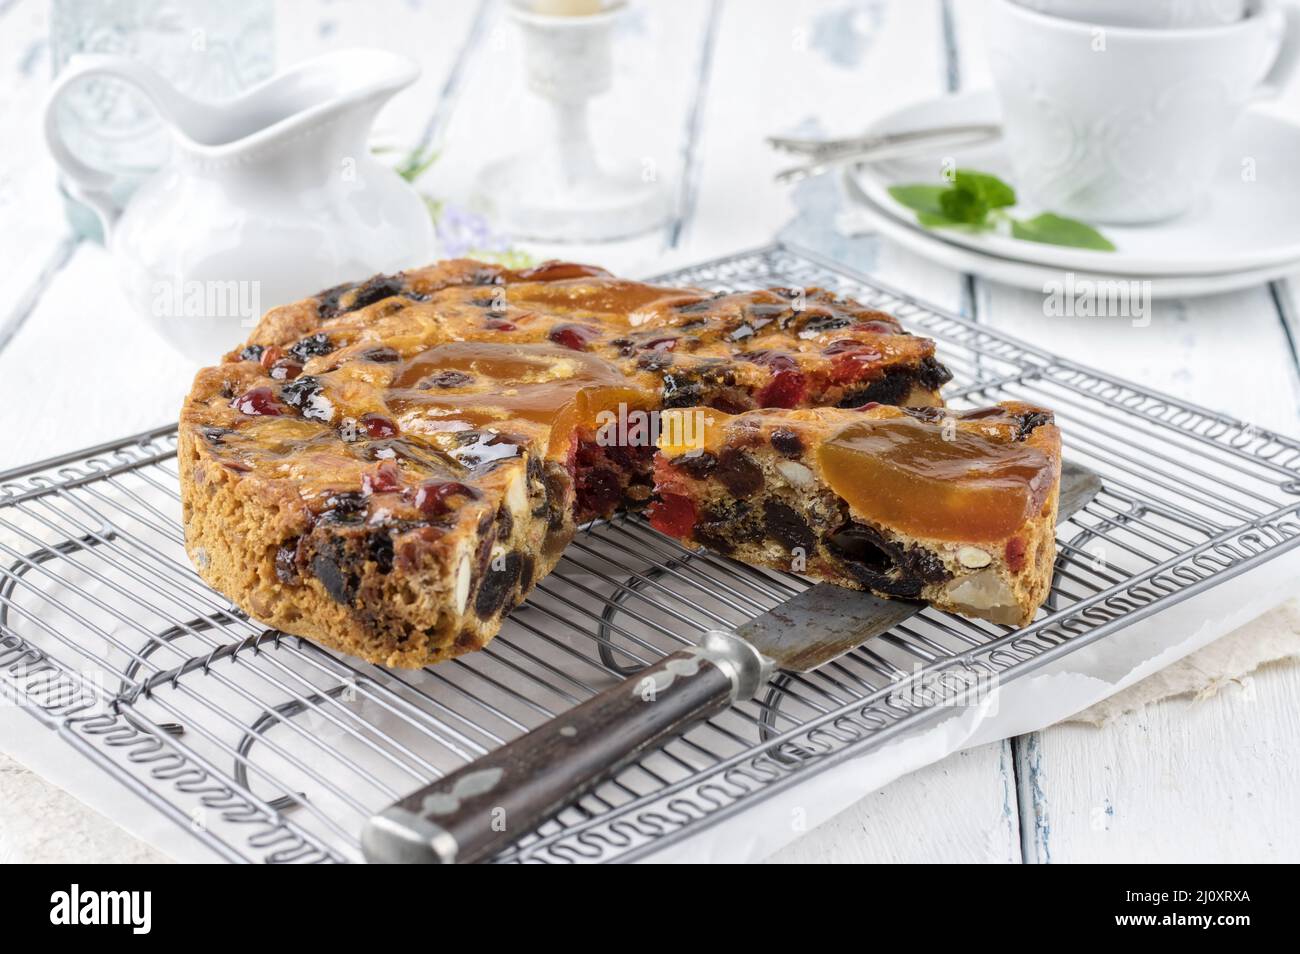 Traditional Australian Christmas cake with fruits and nuts served as close-up on a cake plate Stock Photo